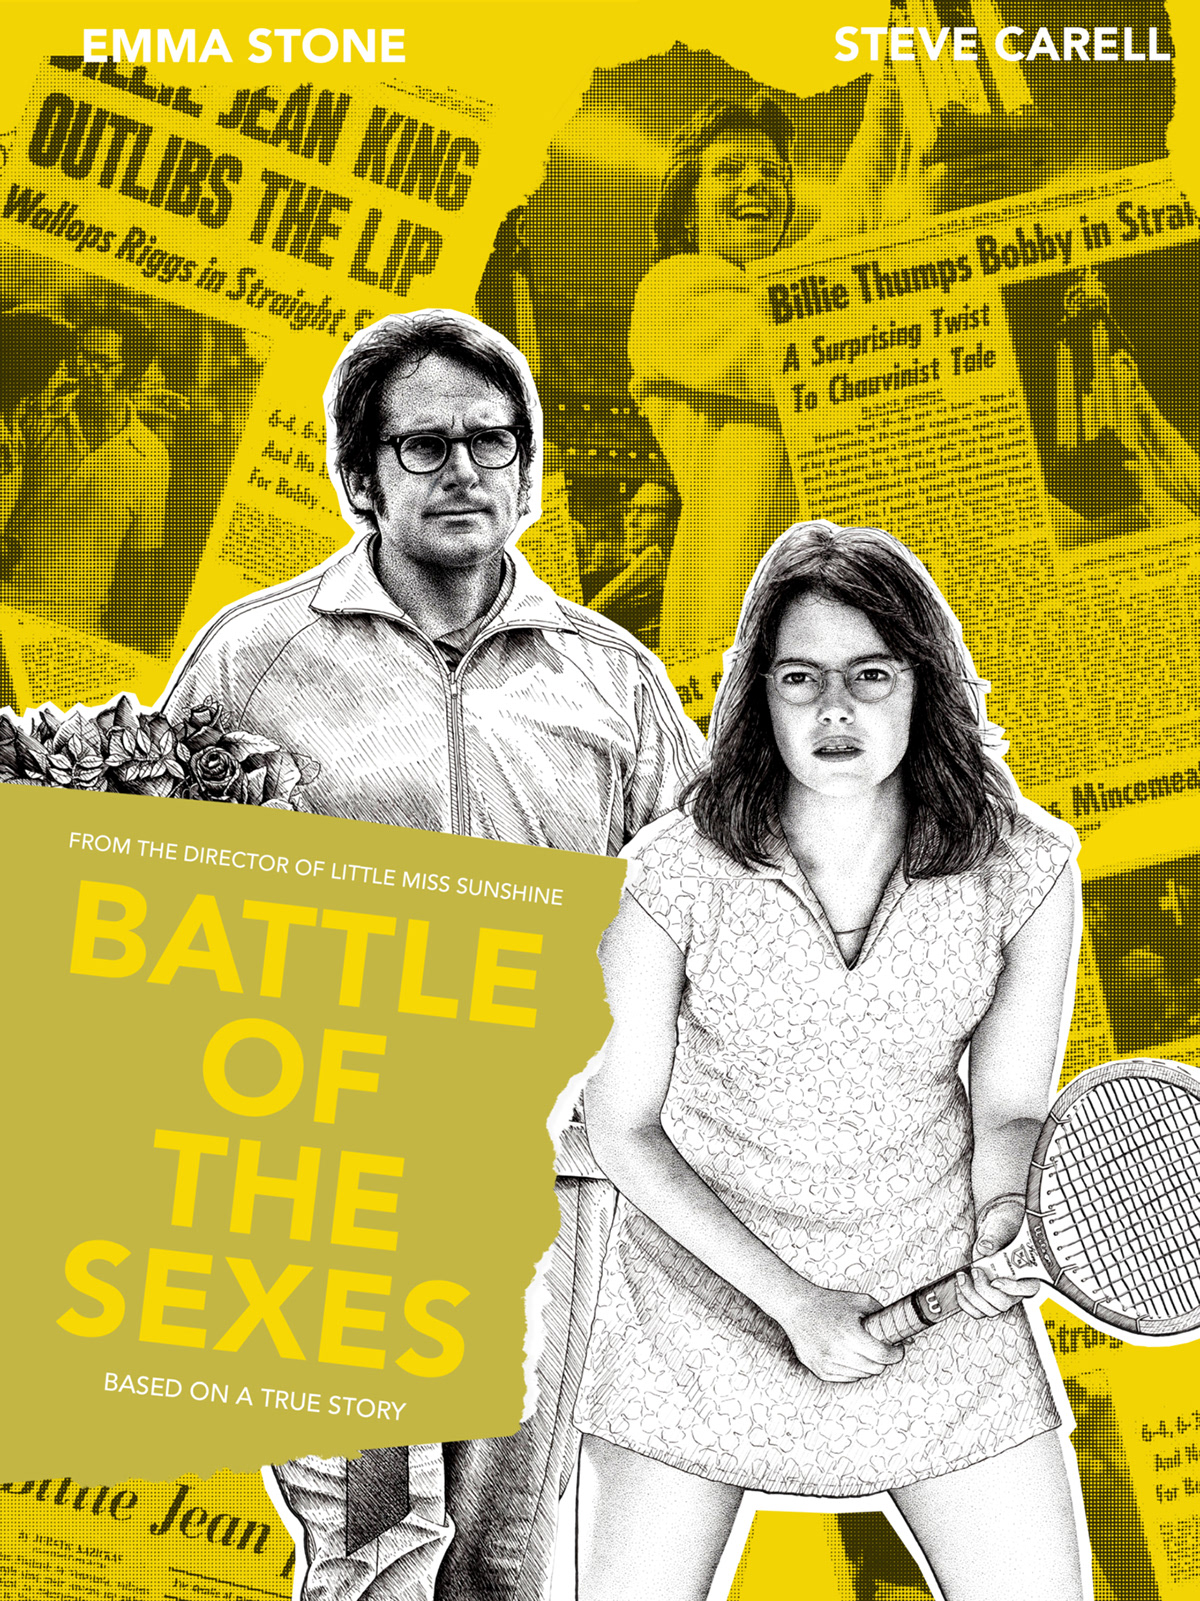 Battle of the Sexes on Behance